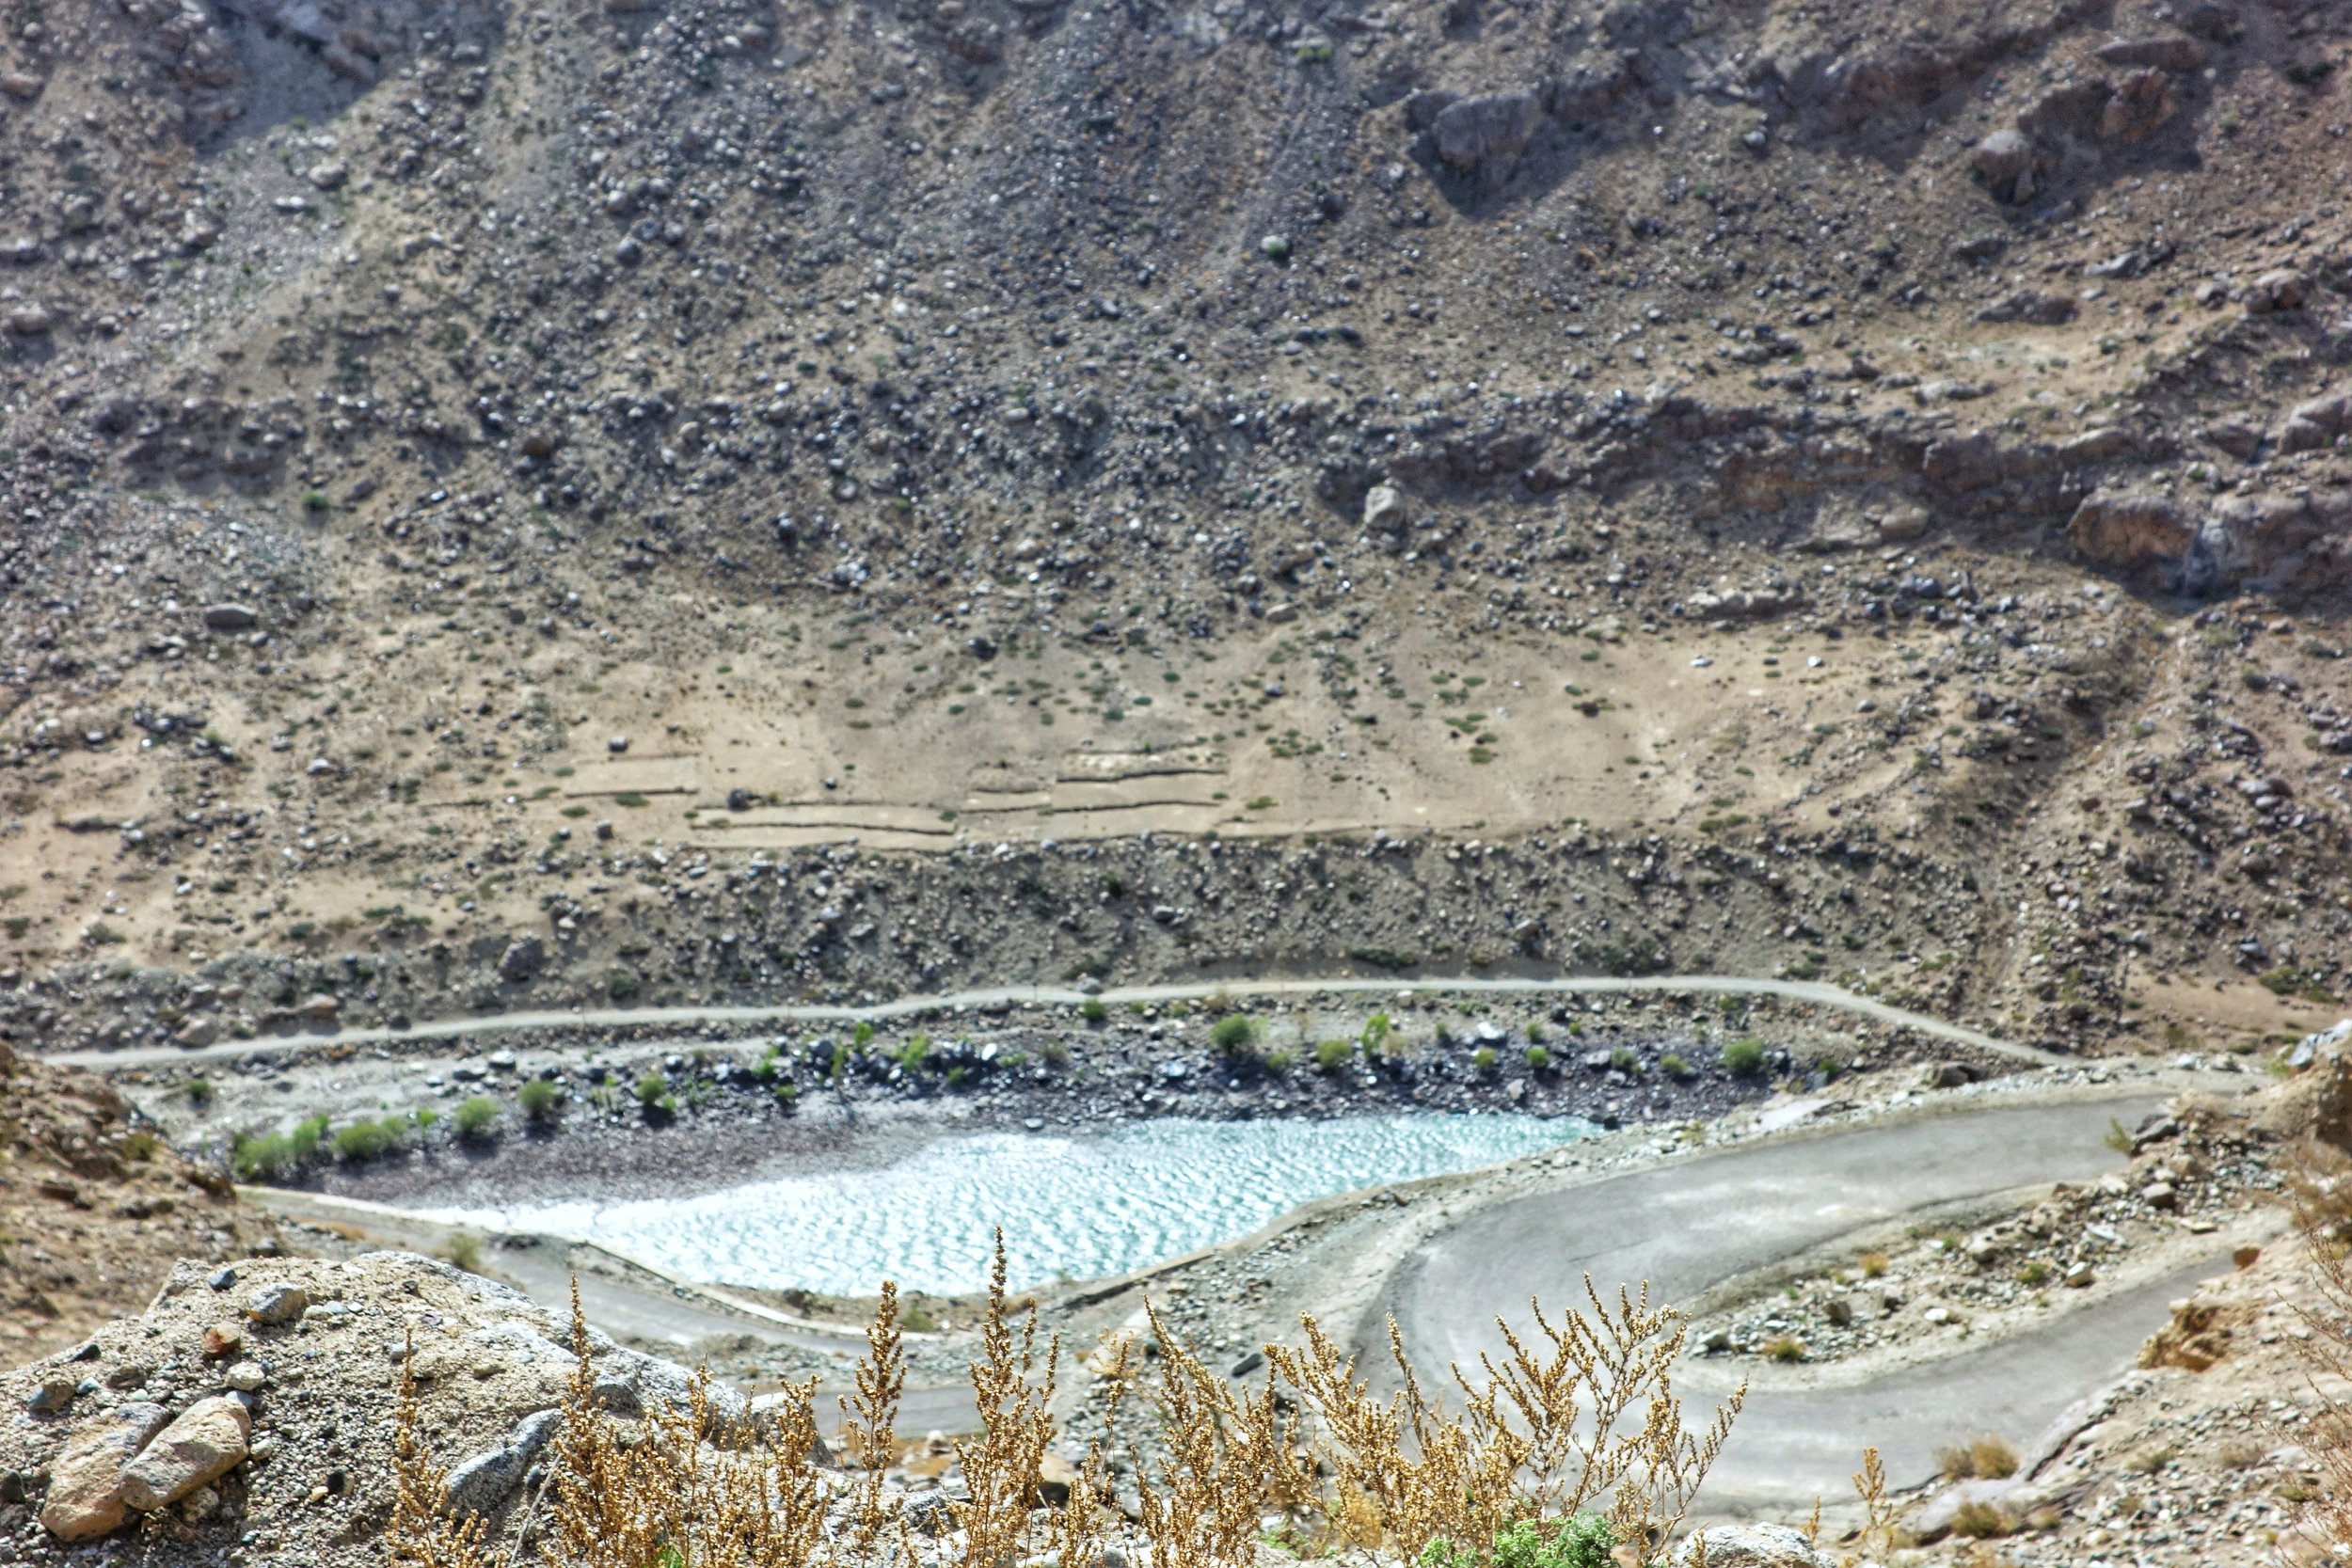 The Old Road which in the old days connected Kargil with Drass along the Shingo River